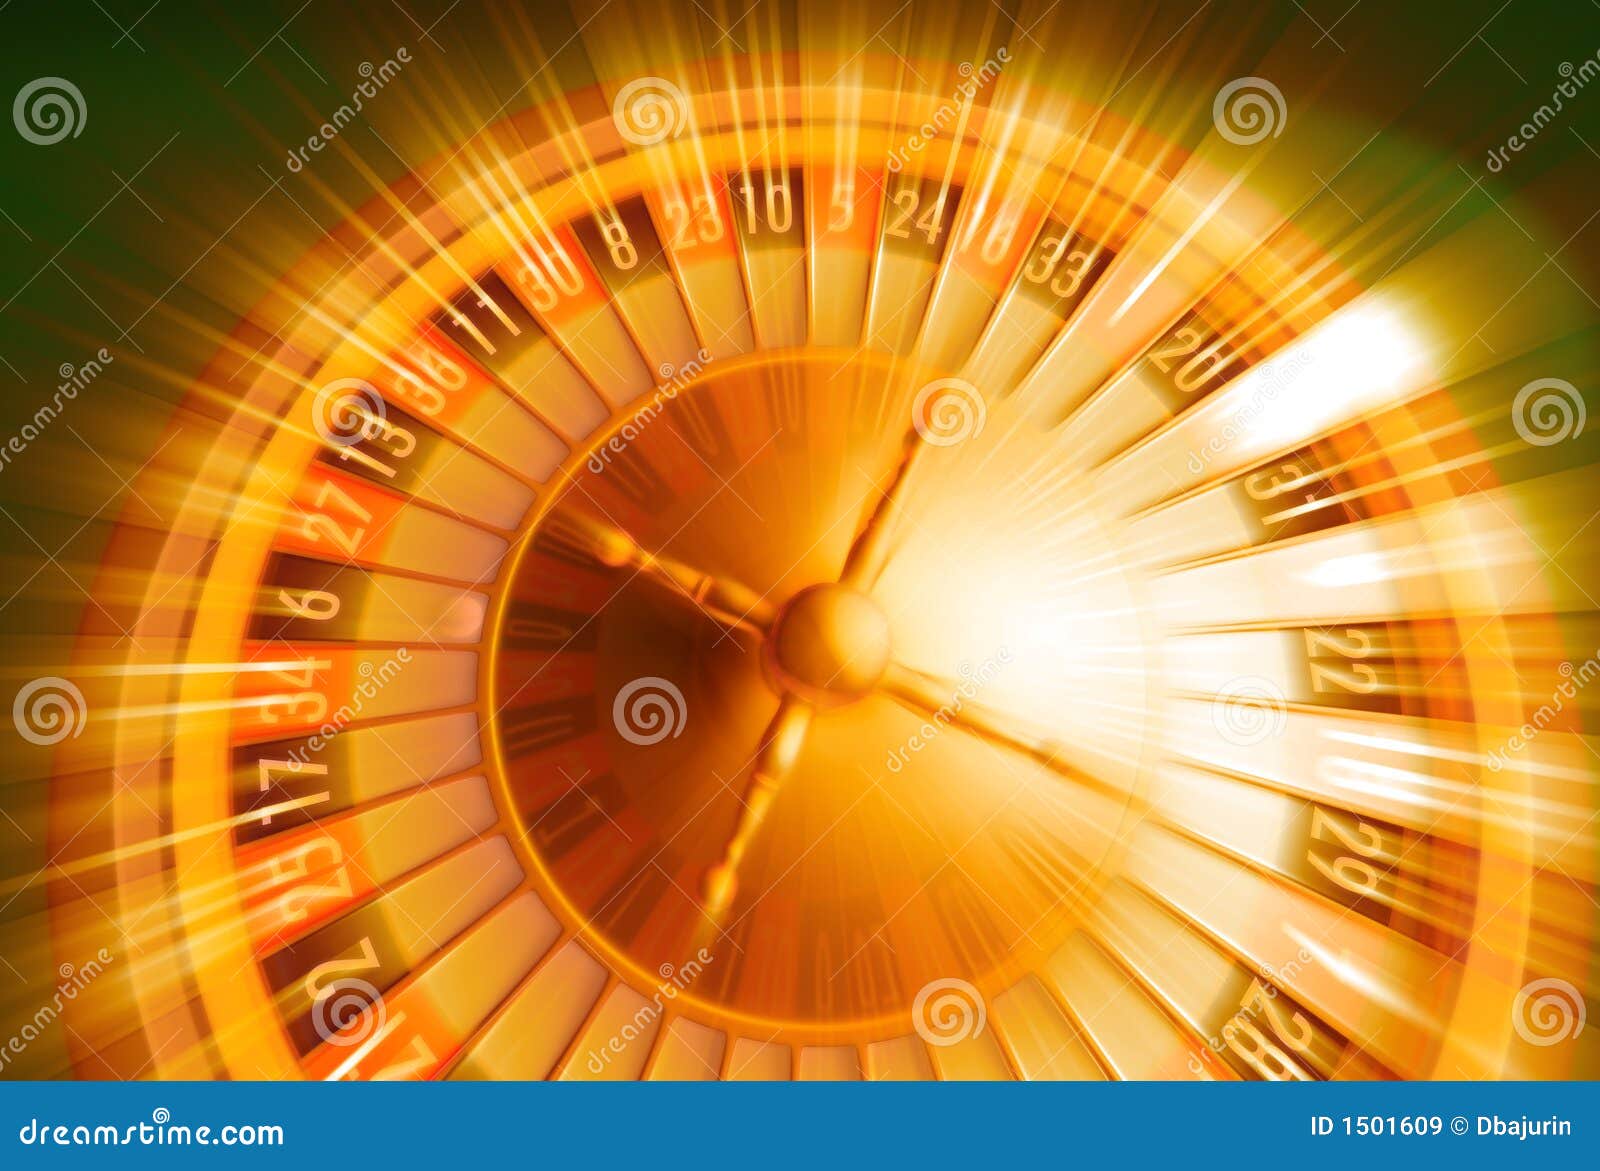 Royalty Free Stock Images: Roulette with streaks